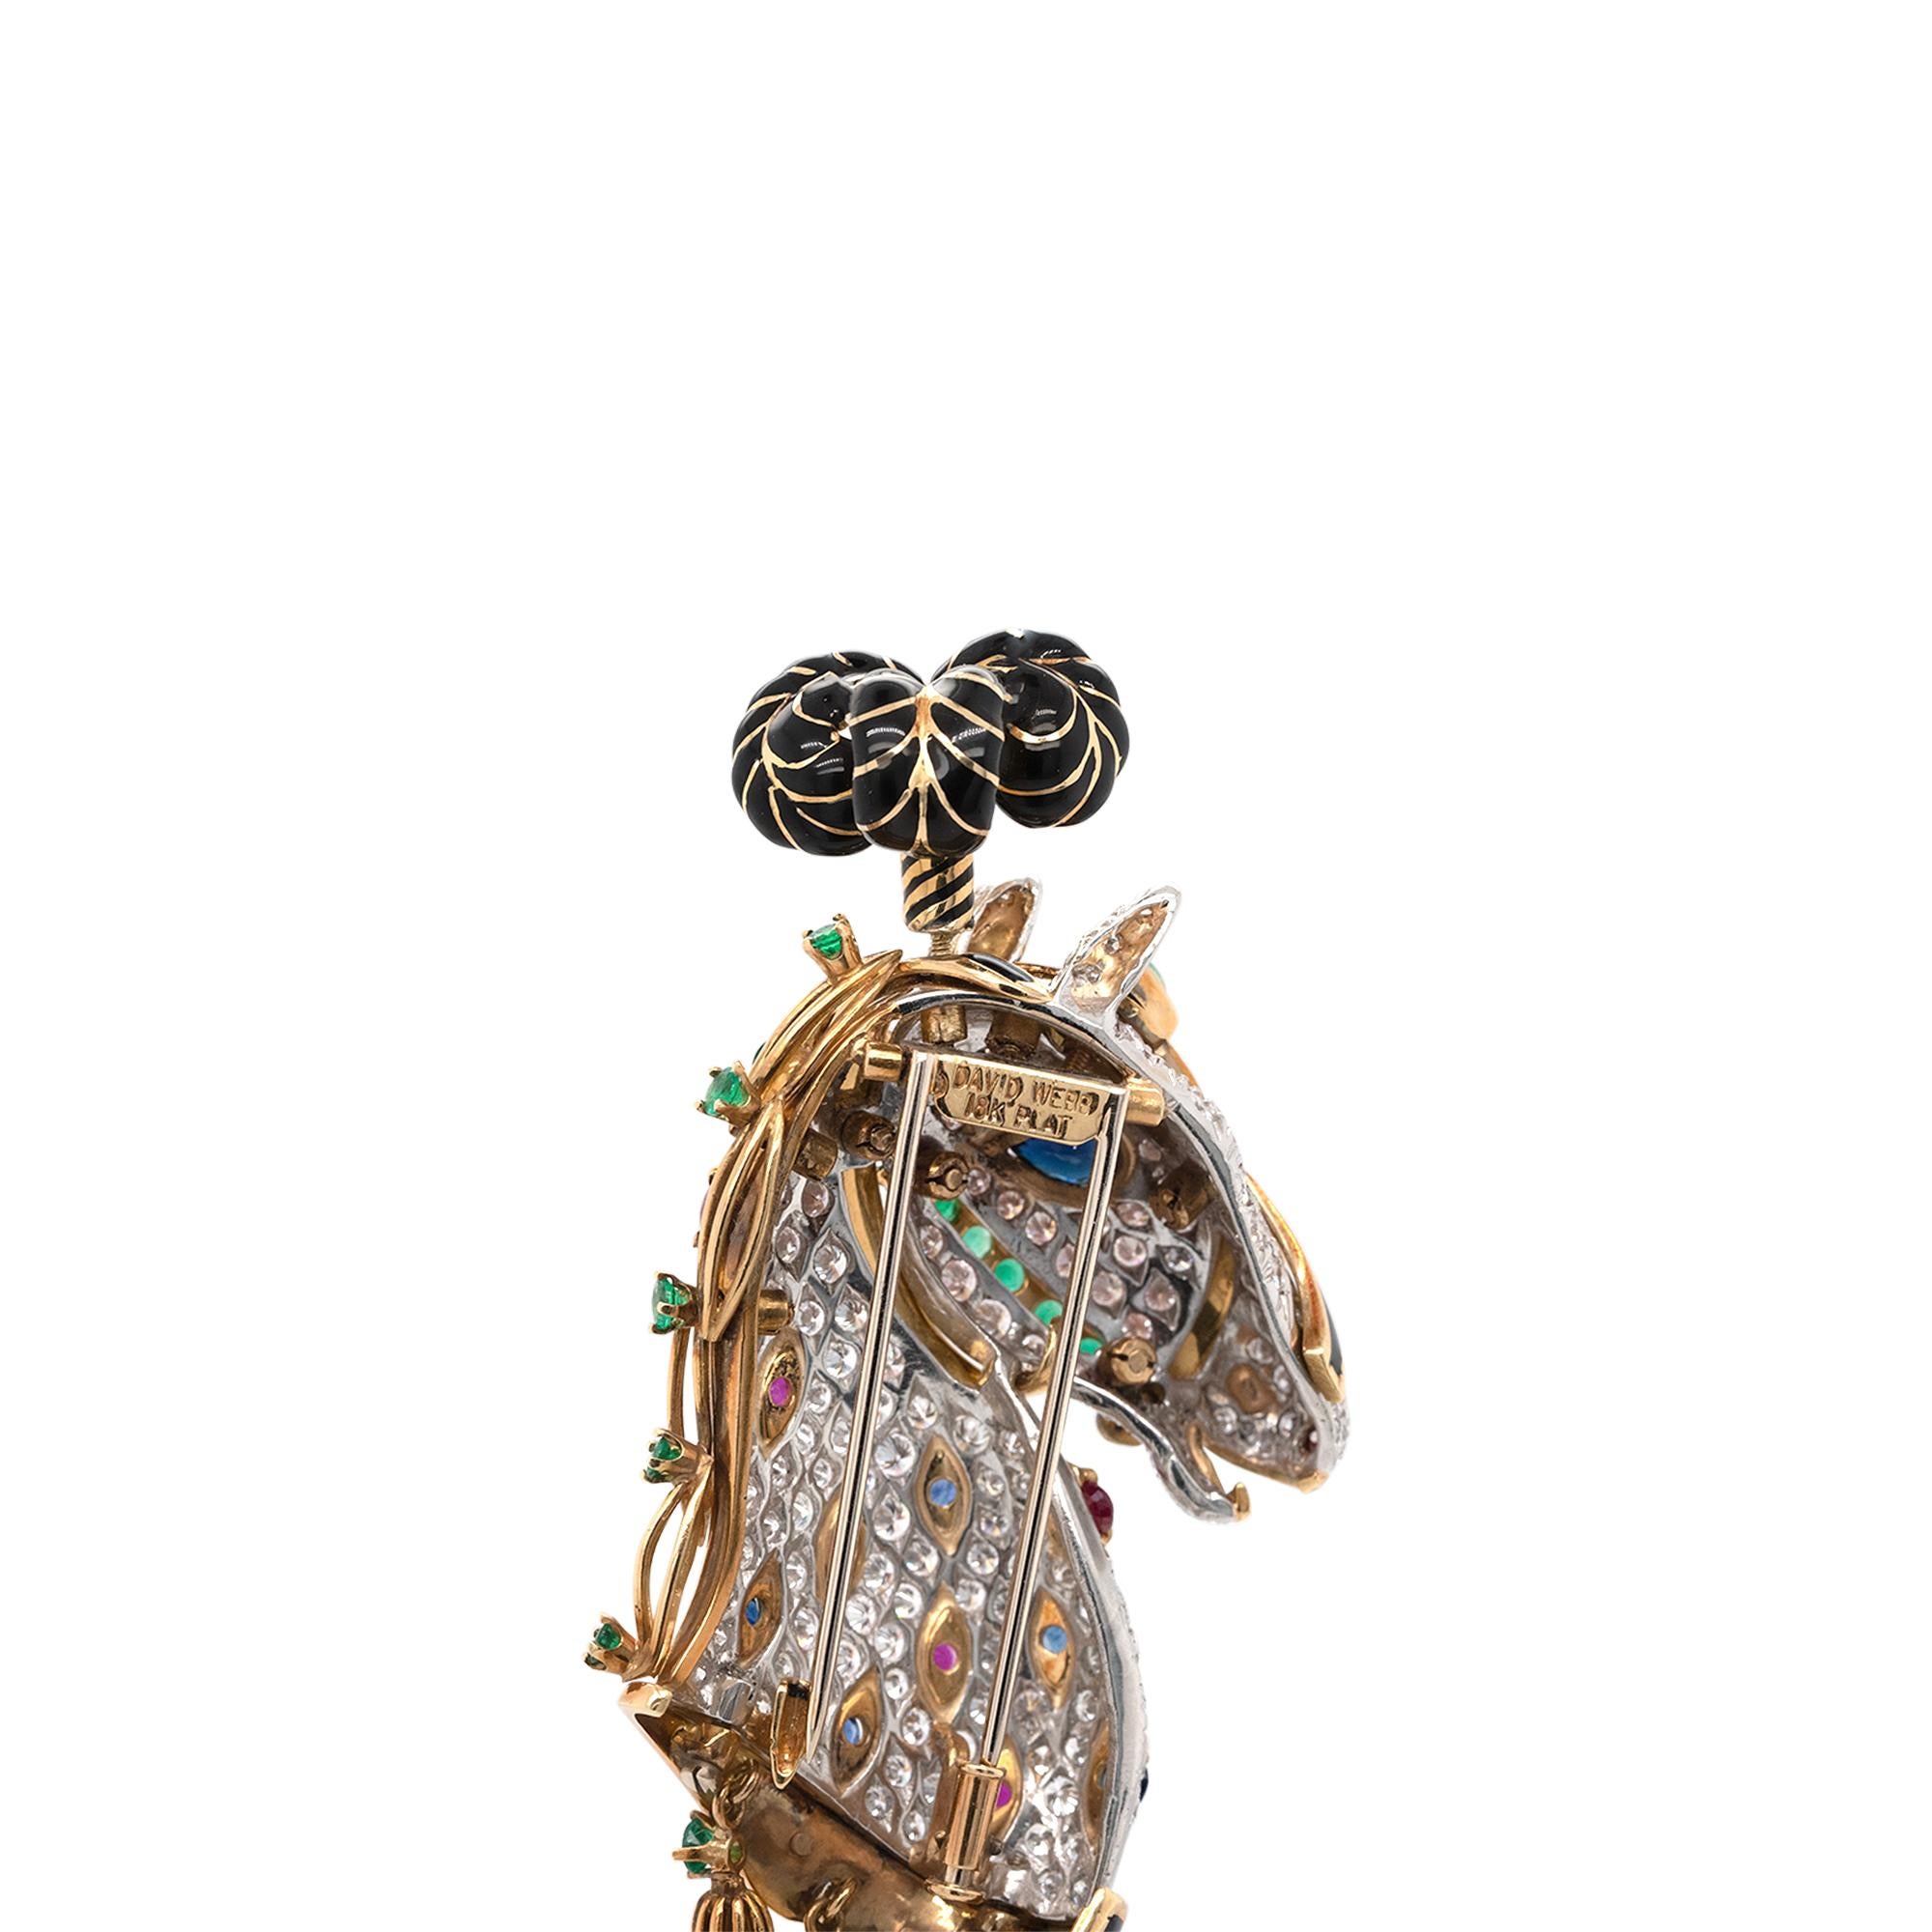  David Webb Brooch Carousel Horse Head  In New Condition For Sale In Boca Raton, FL